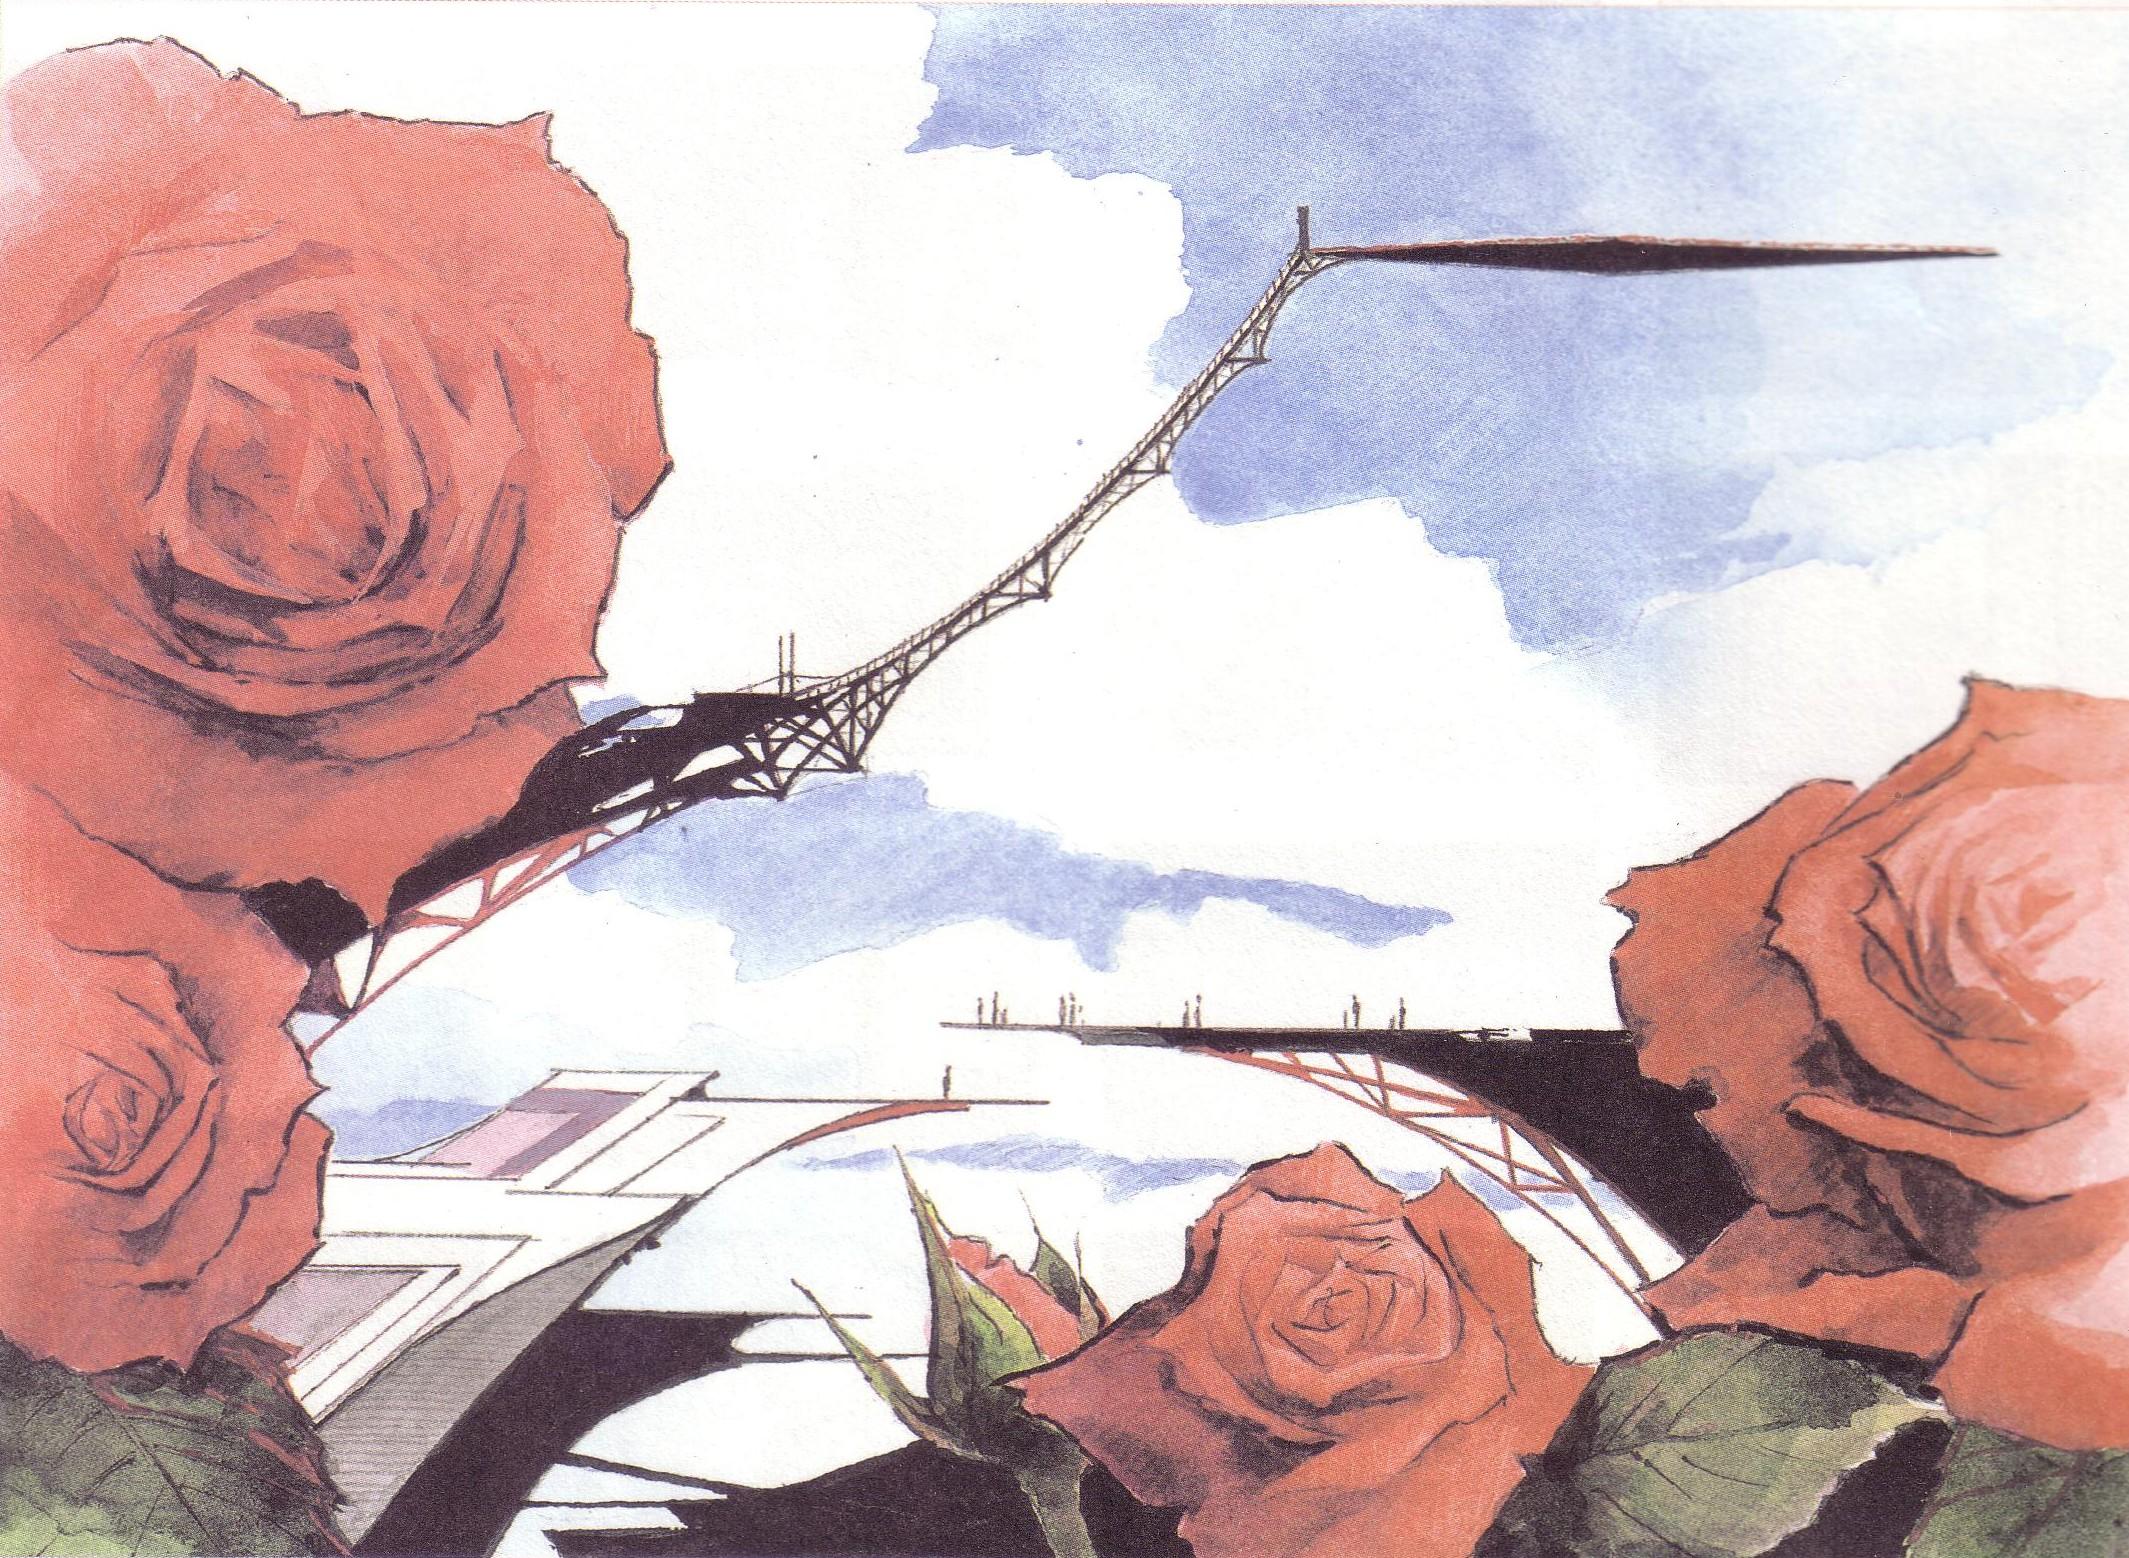 High Resolution Image Collection of Revolutionary Girl Utena: Nora Blincow